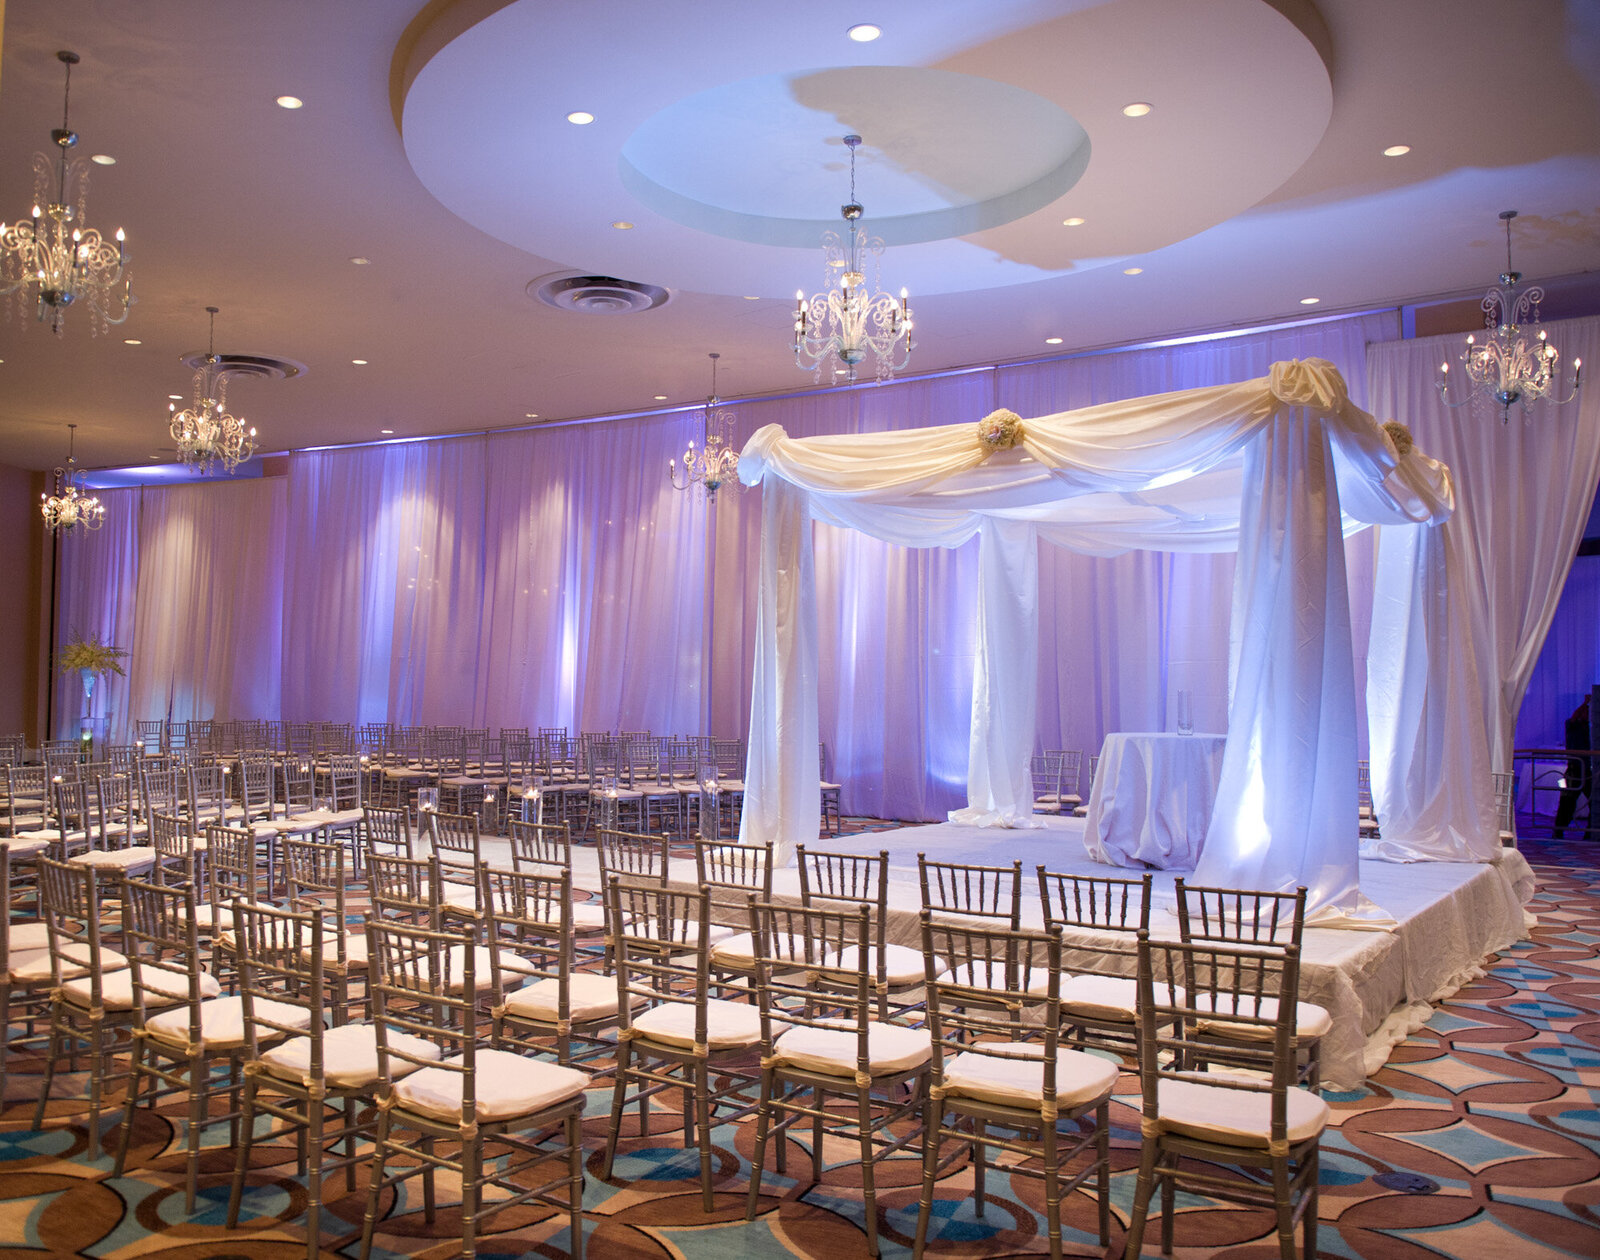 Luxurious wedding ceremony site with golden chairs and white drapings